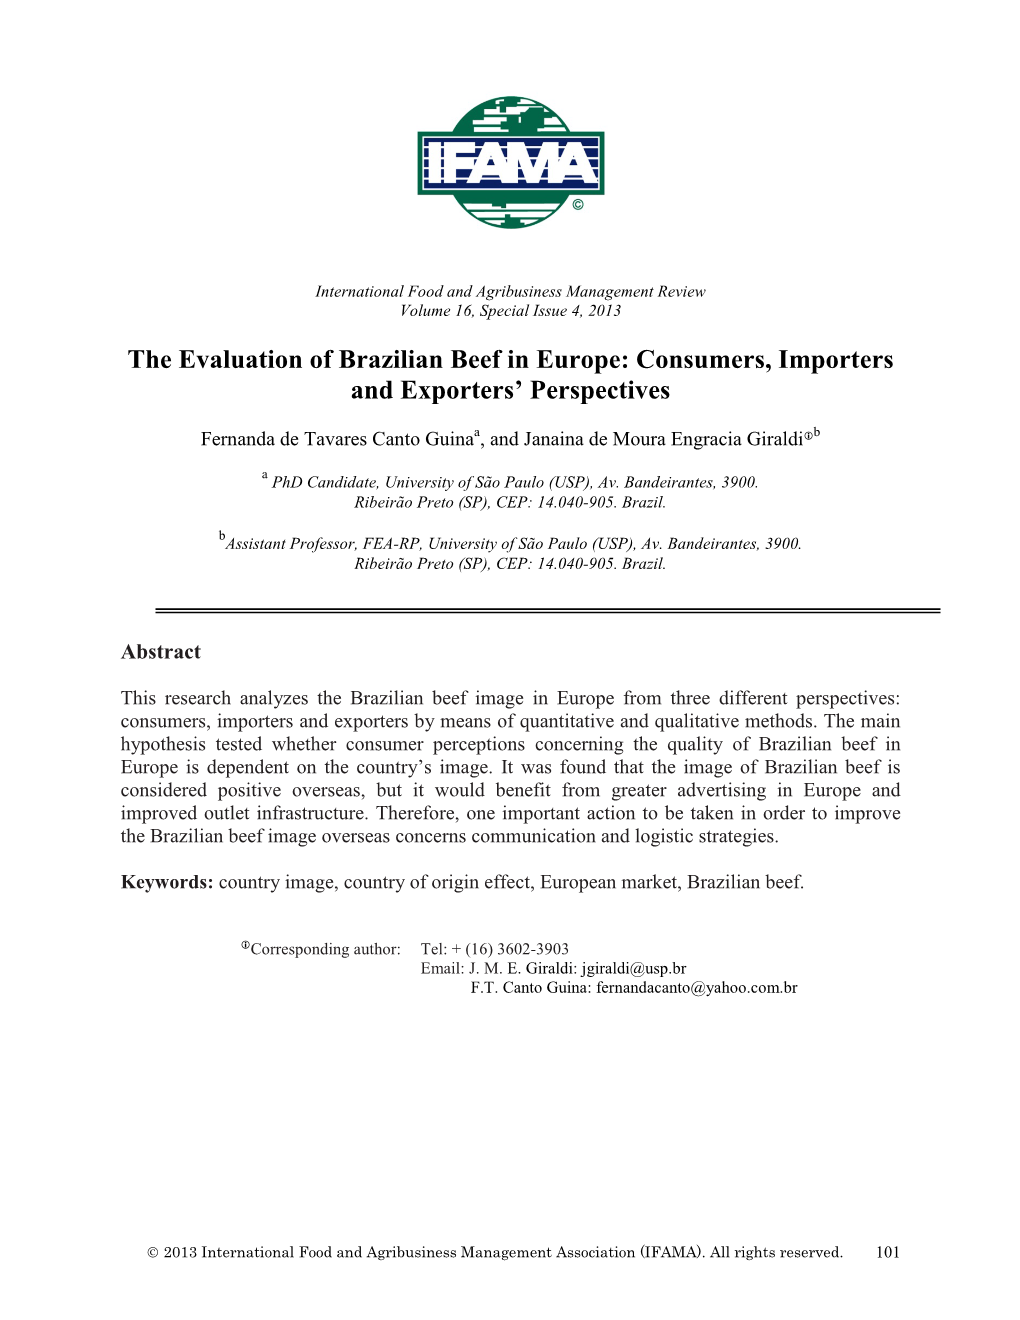 The Evaluation of Brazilian Beef in Europe: Consumers, Importers and Exporters’ Perspectives